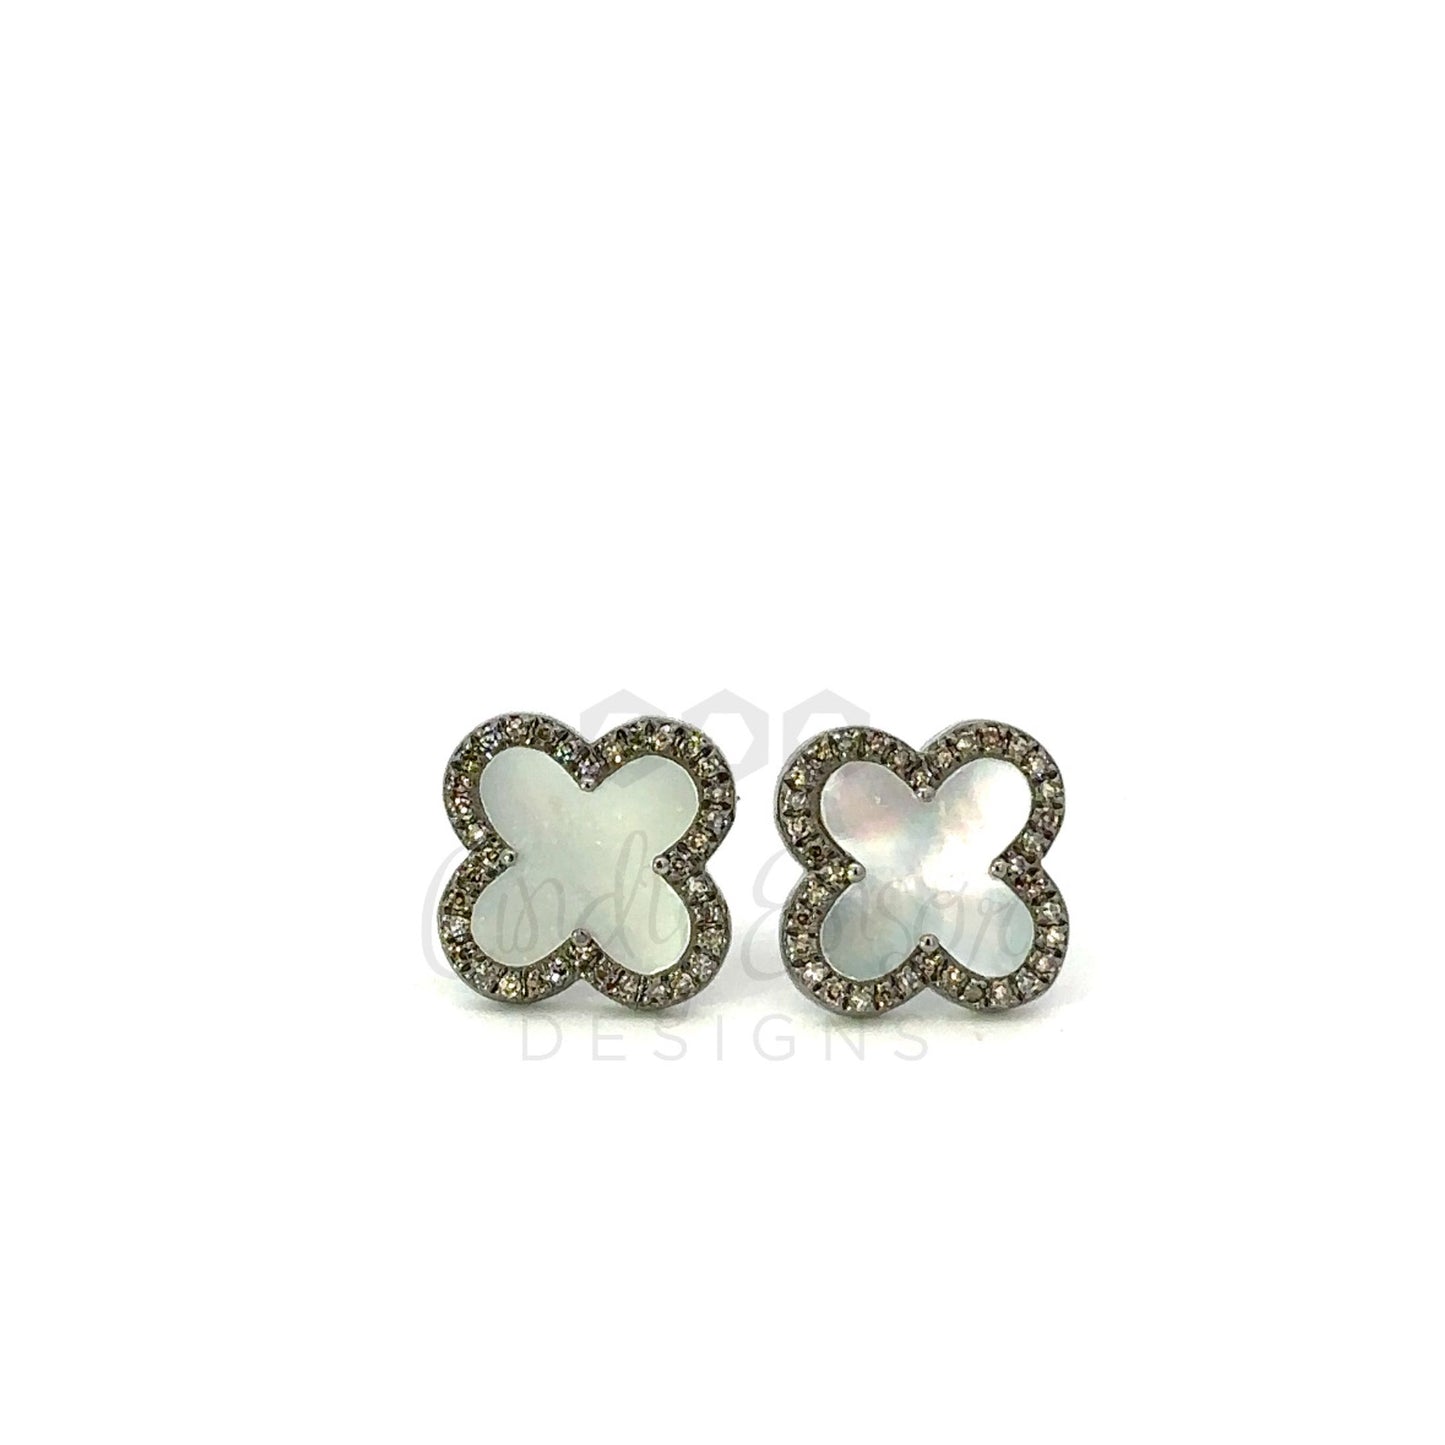 White Mother of Pearl Clover Stud with Pave Diamond Border